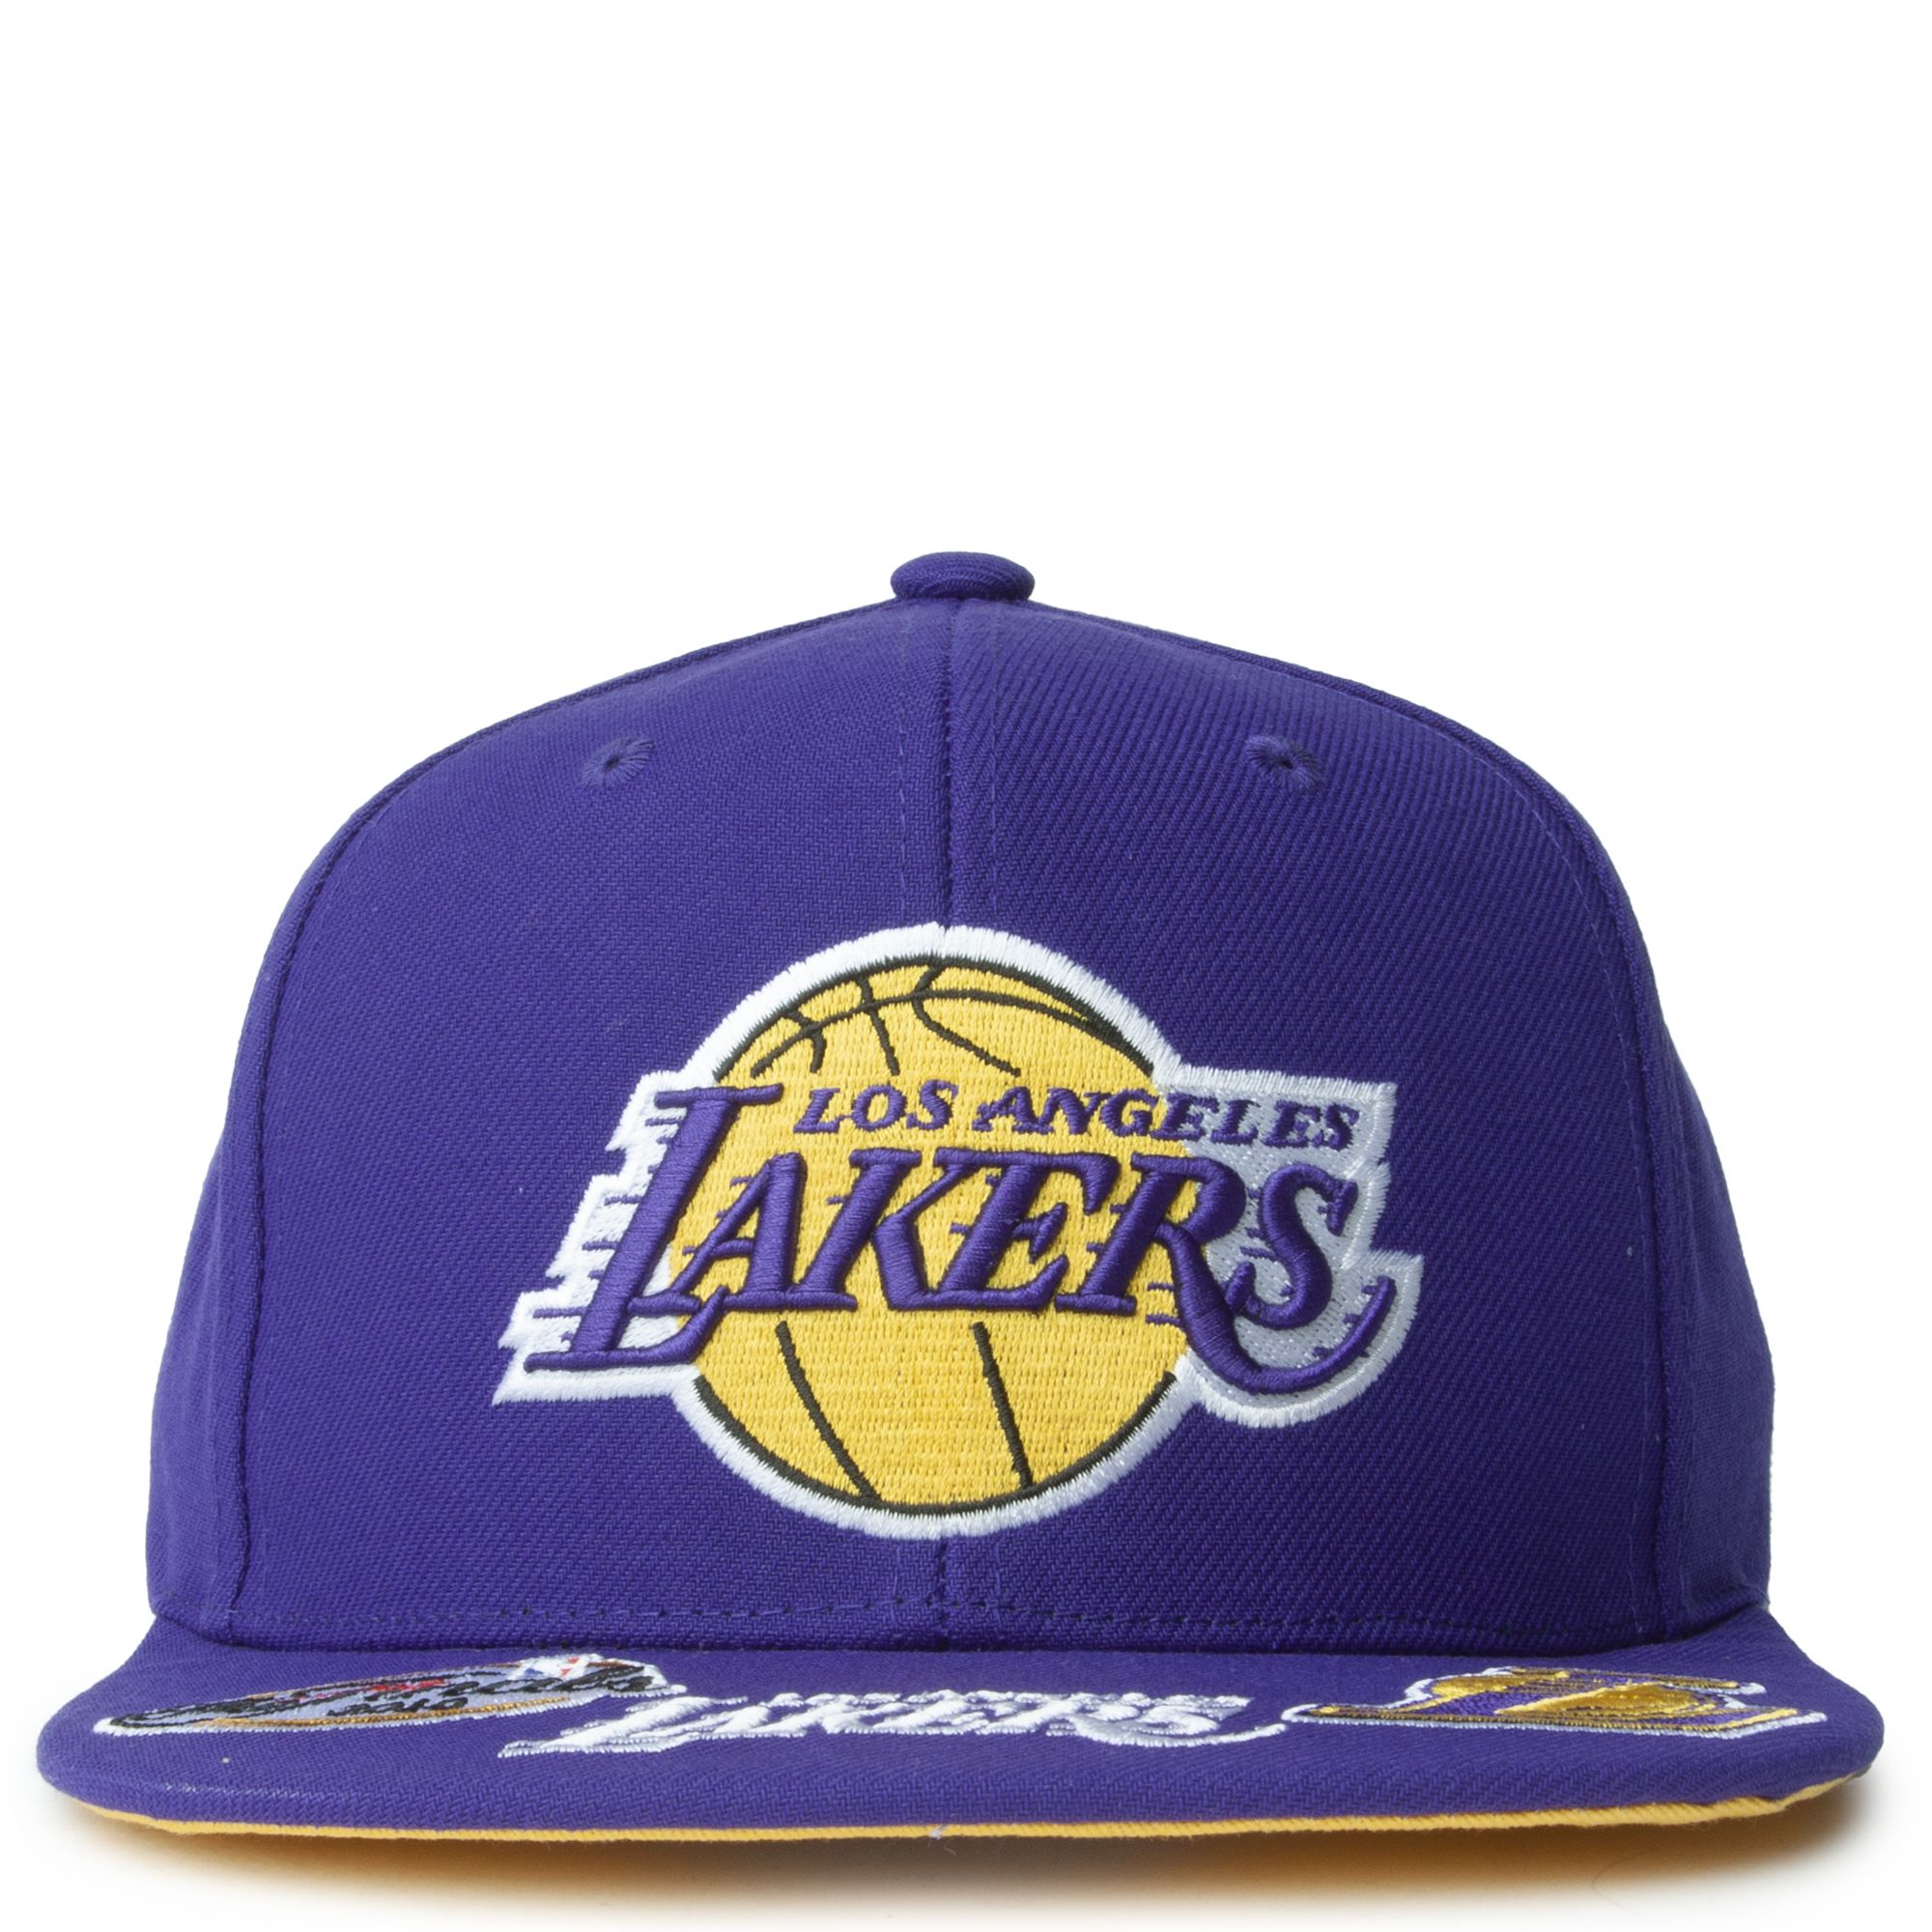 Mitchell and Ness Los Angeles Lakers Sharktooth Snapback Hat Yellow / Purple